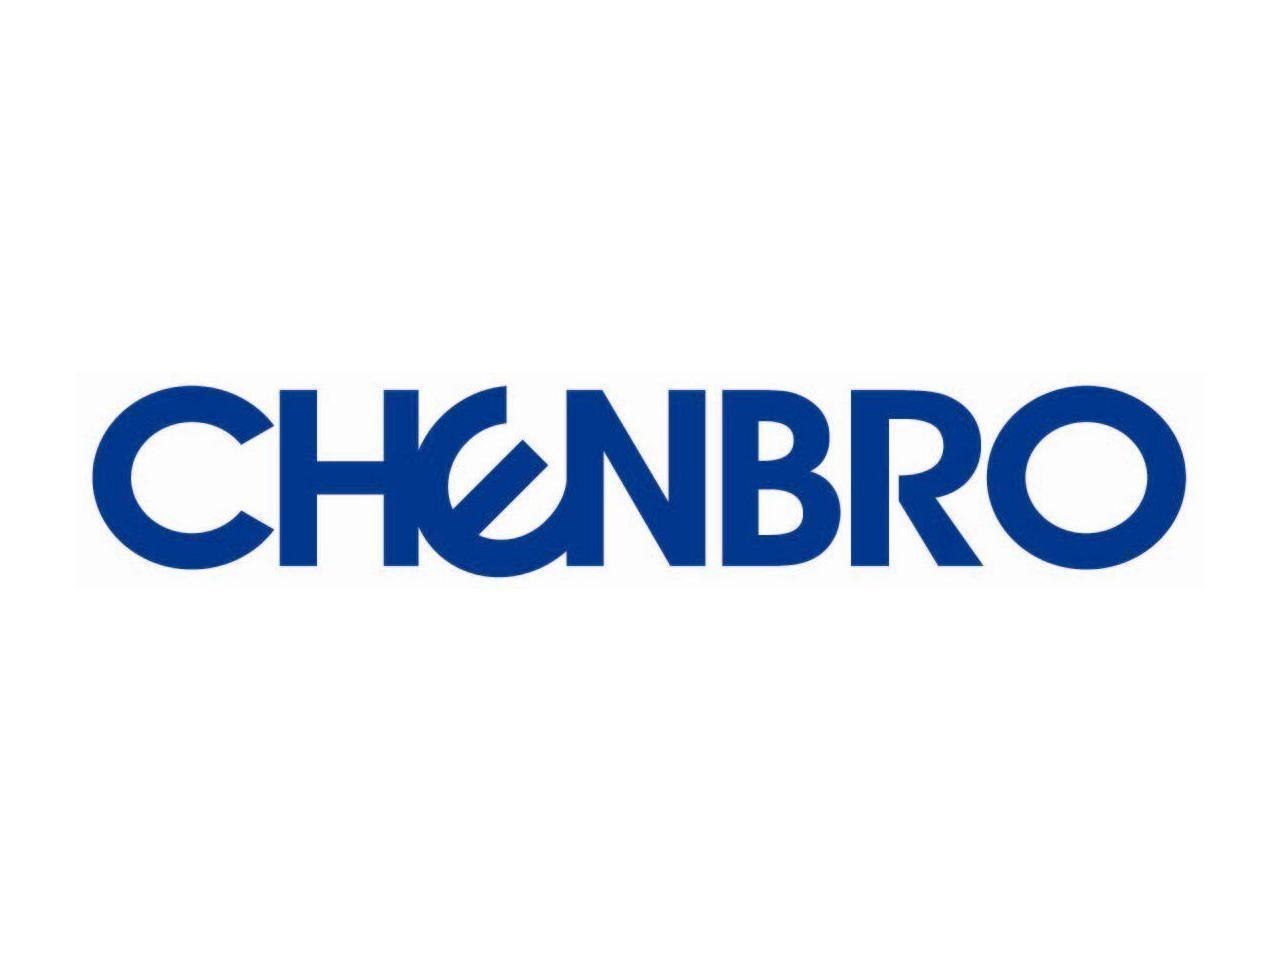 Chenbro 384-14303-3100A0 Simple Rail Long With Screw Packing Brown Box